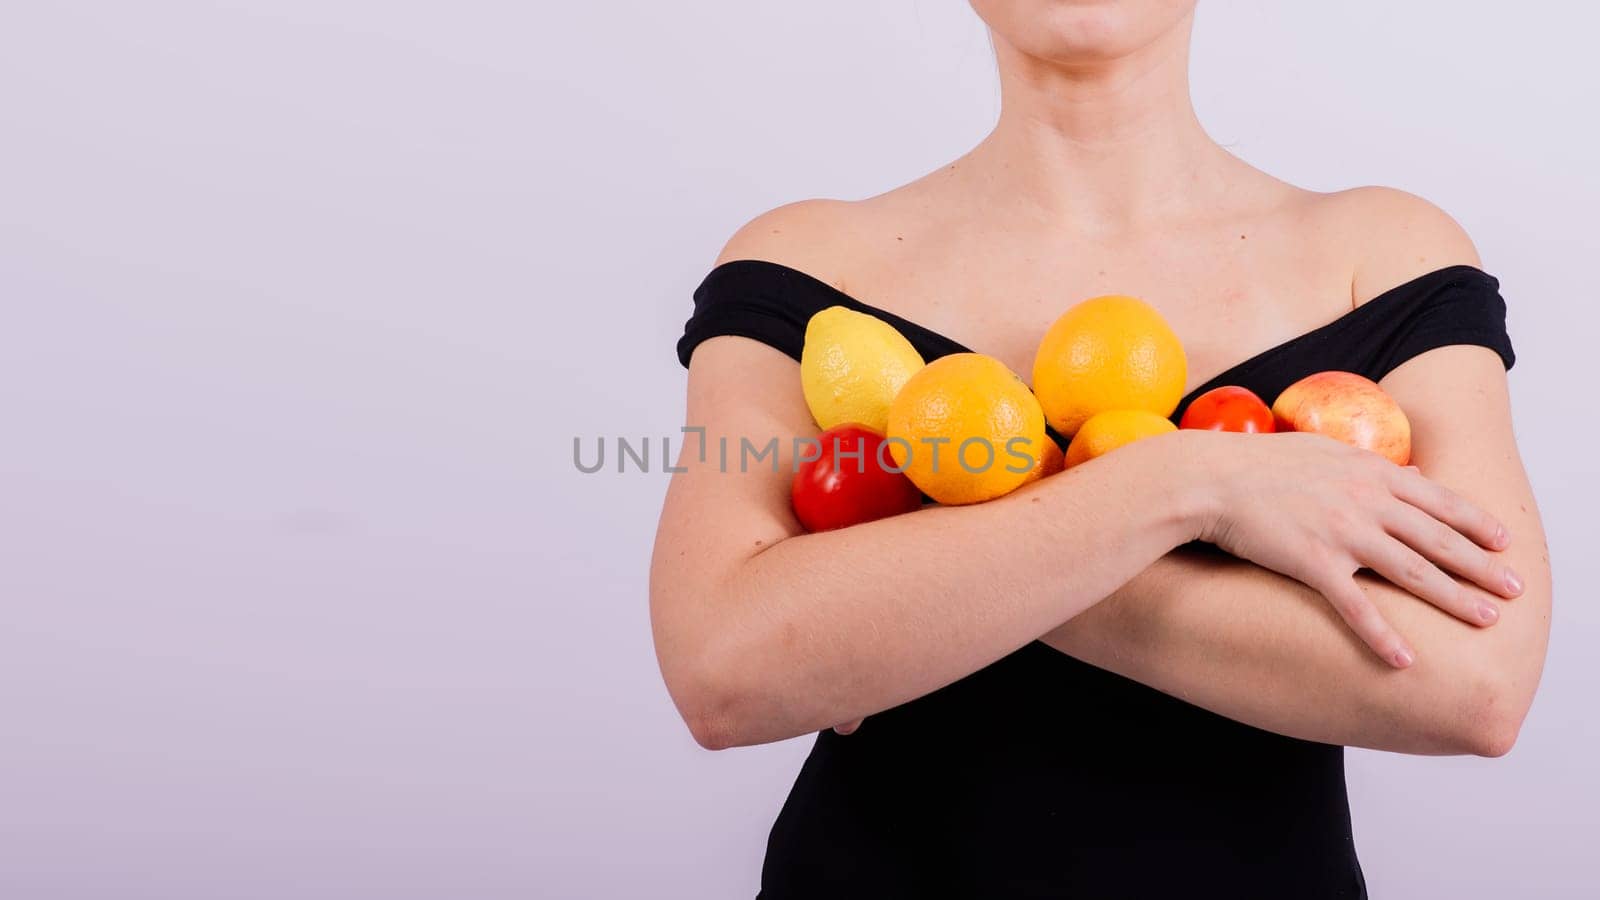 A female holding apples, lemons, oranges in different arms isolated on grey background. by Zelenin